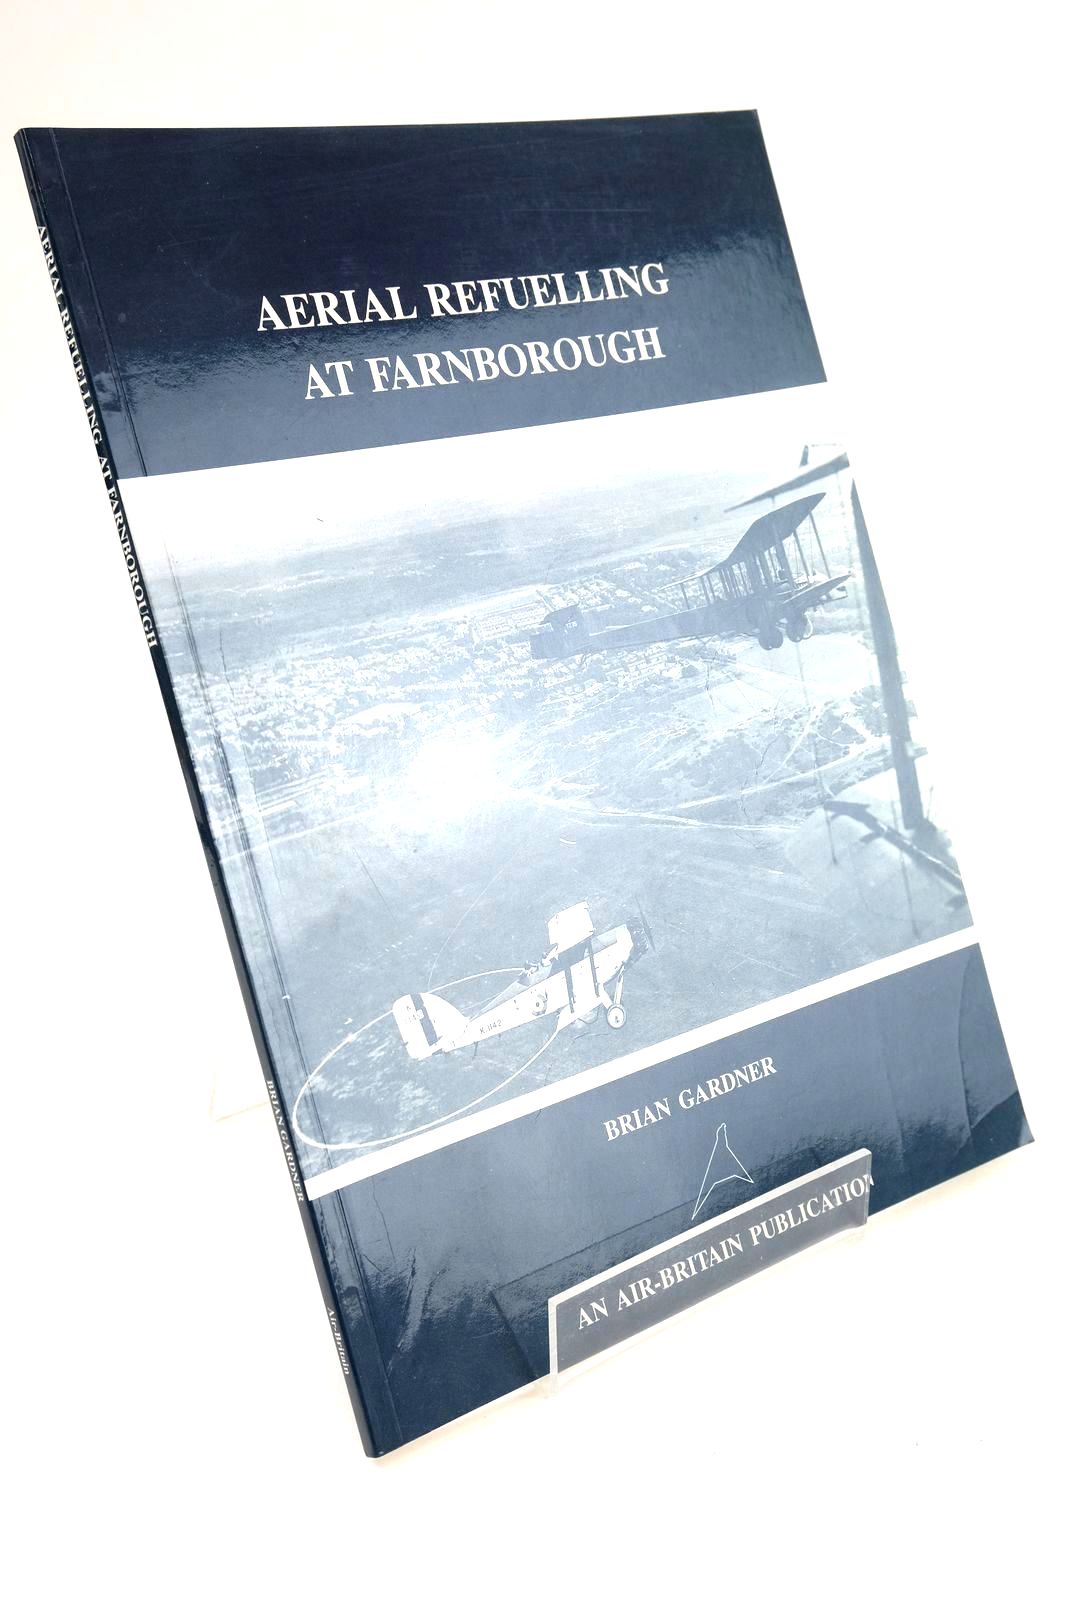 Photo of AERIAL REFUELLING AT FARNBOROUGH written by Gardner, Brian published by Air-Britain (Historians) Ltd. (STOCK CODE: 1325184)  for sale by Stella & Rose's Books